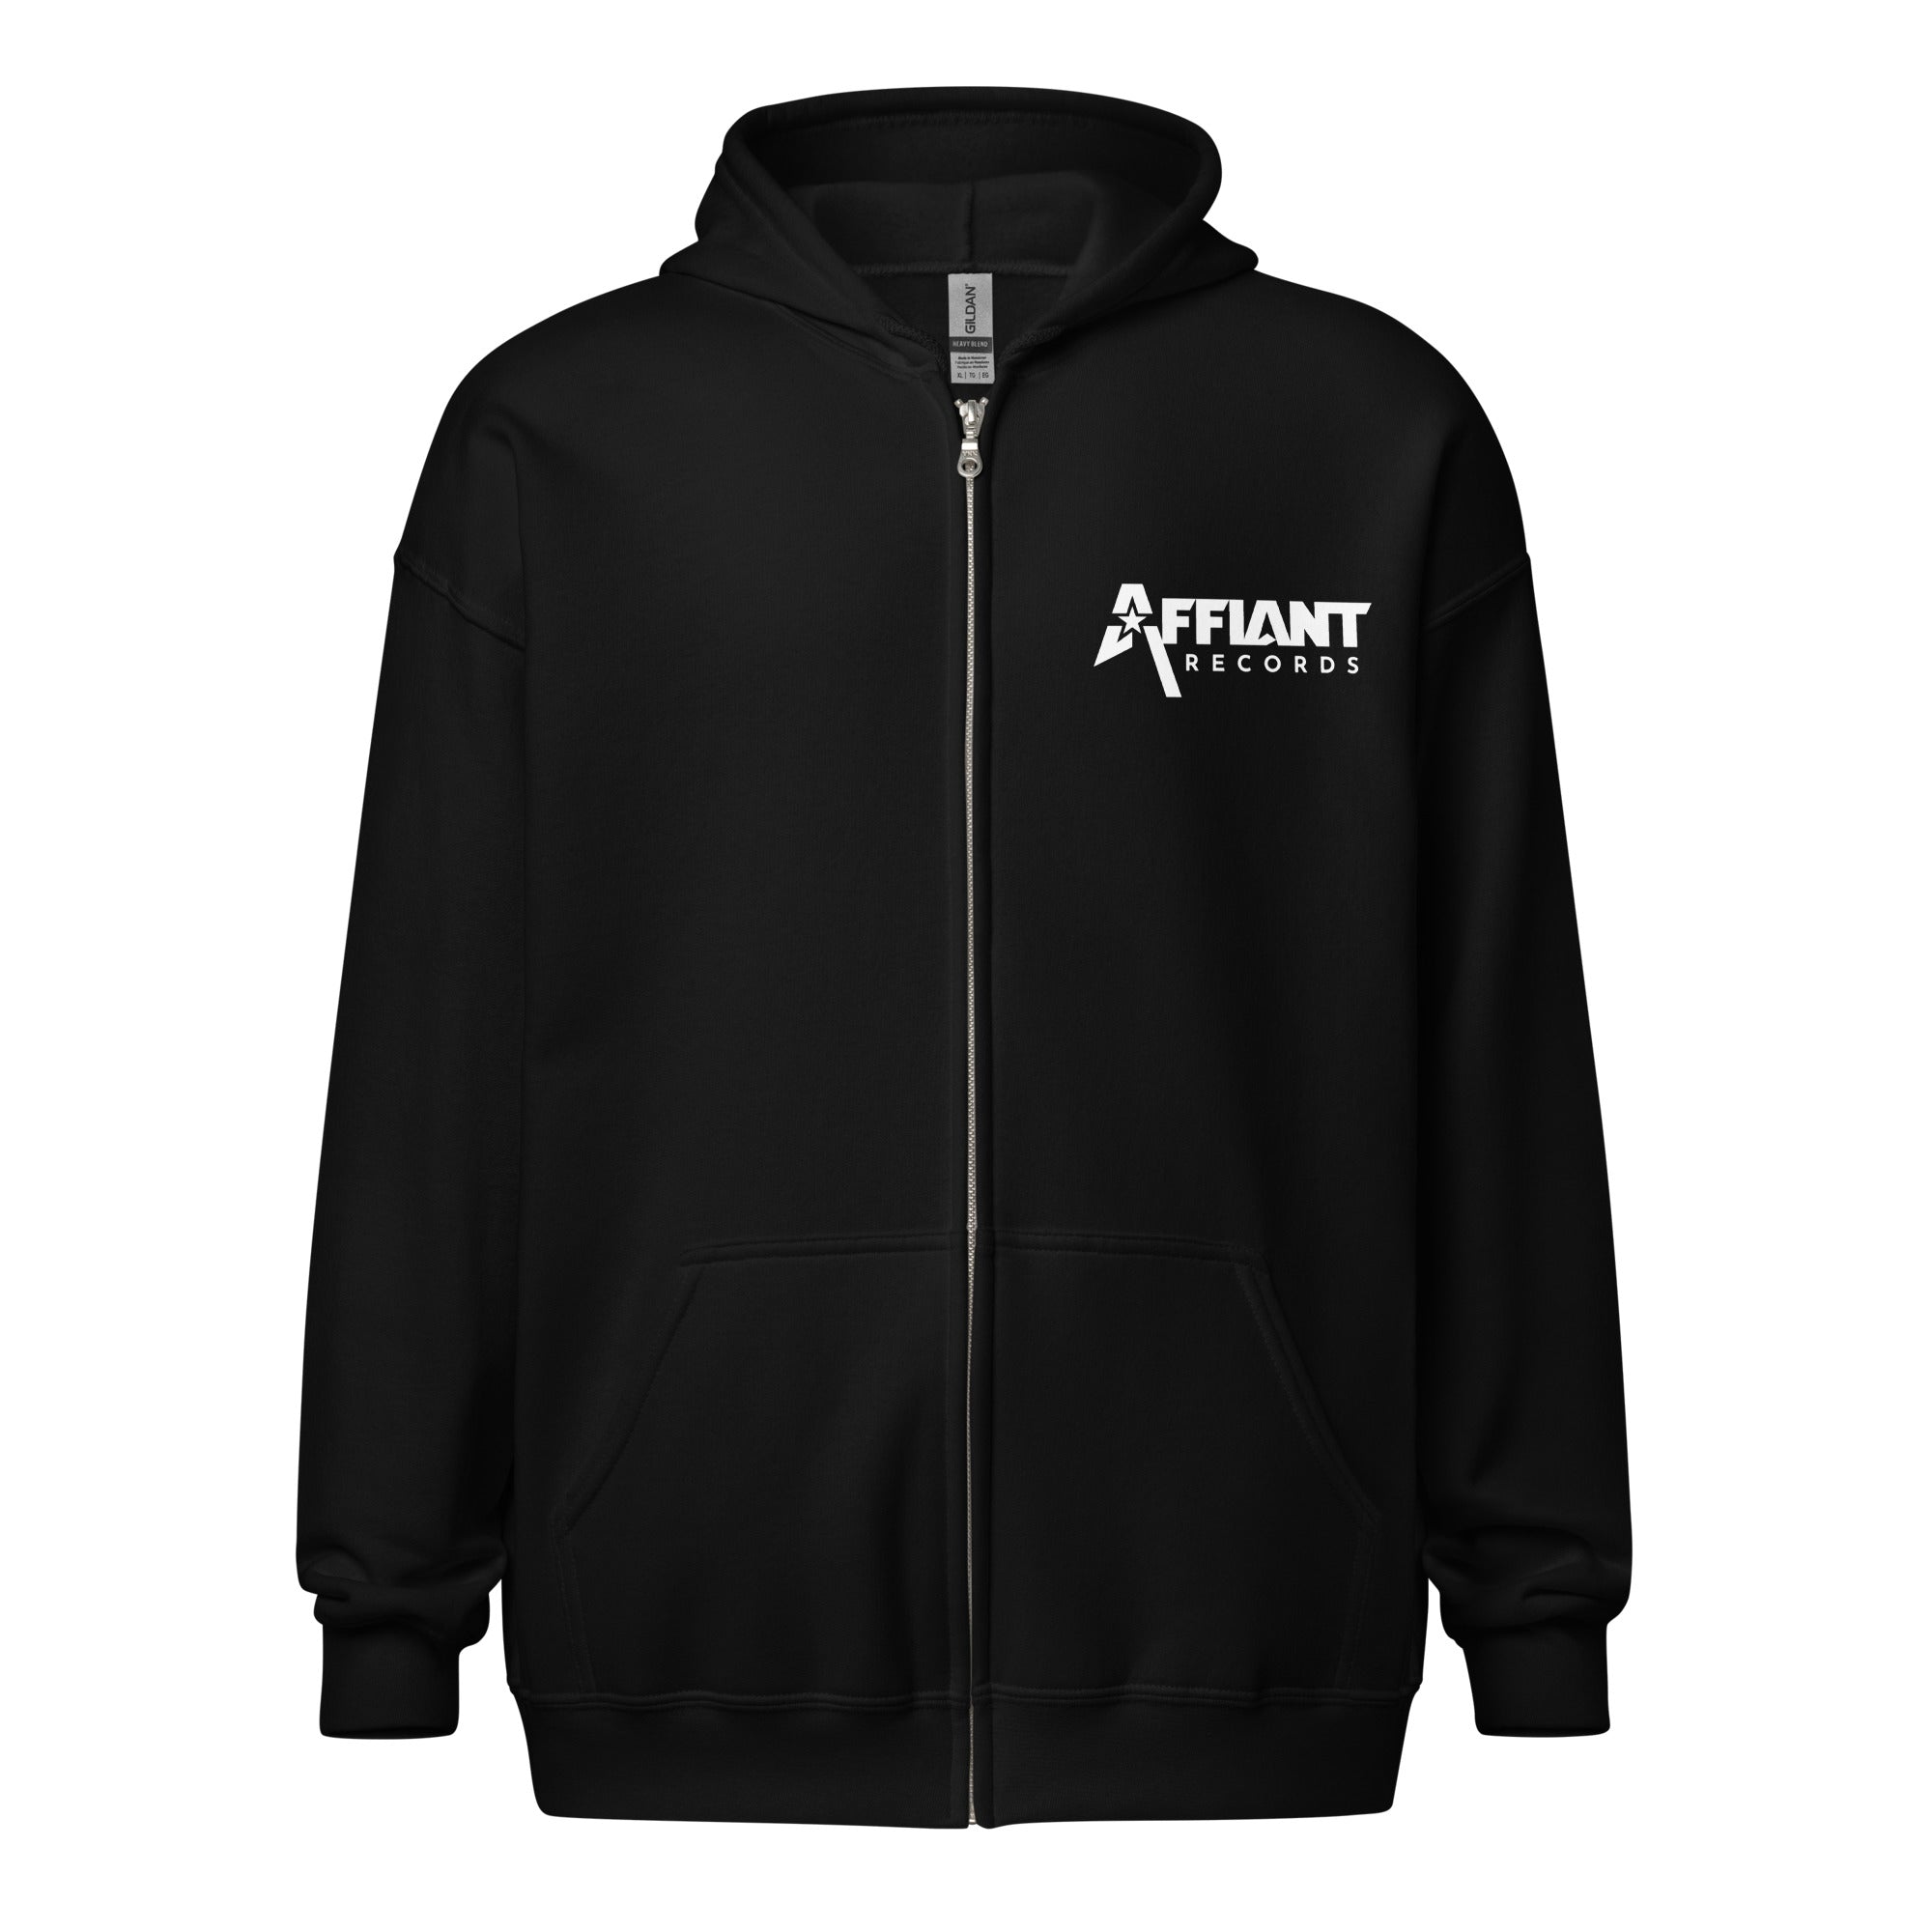 AFFIANT RECORDS - FULL LOGO ZIP UP HOODIE